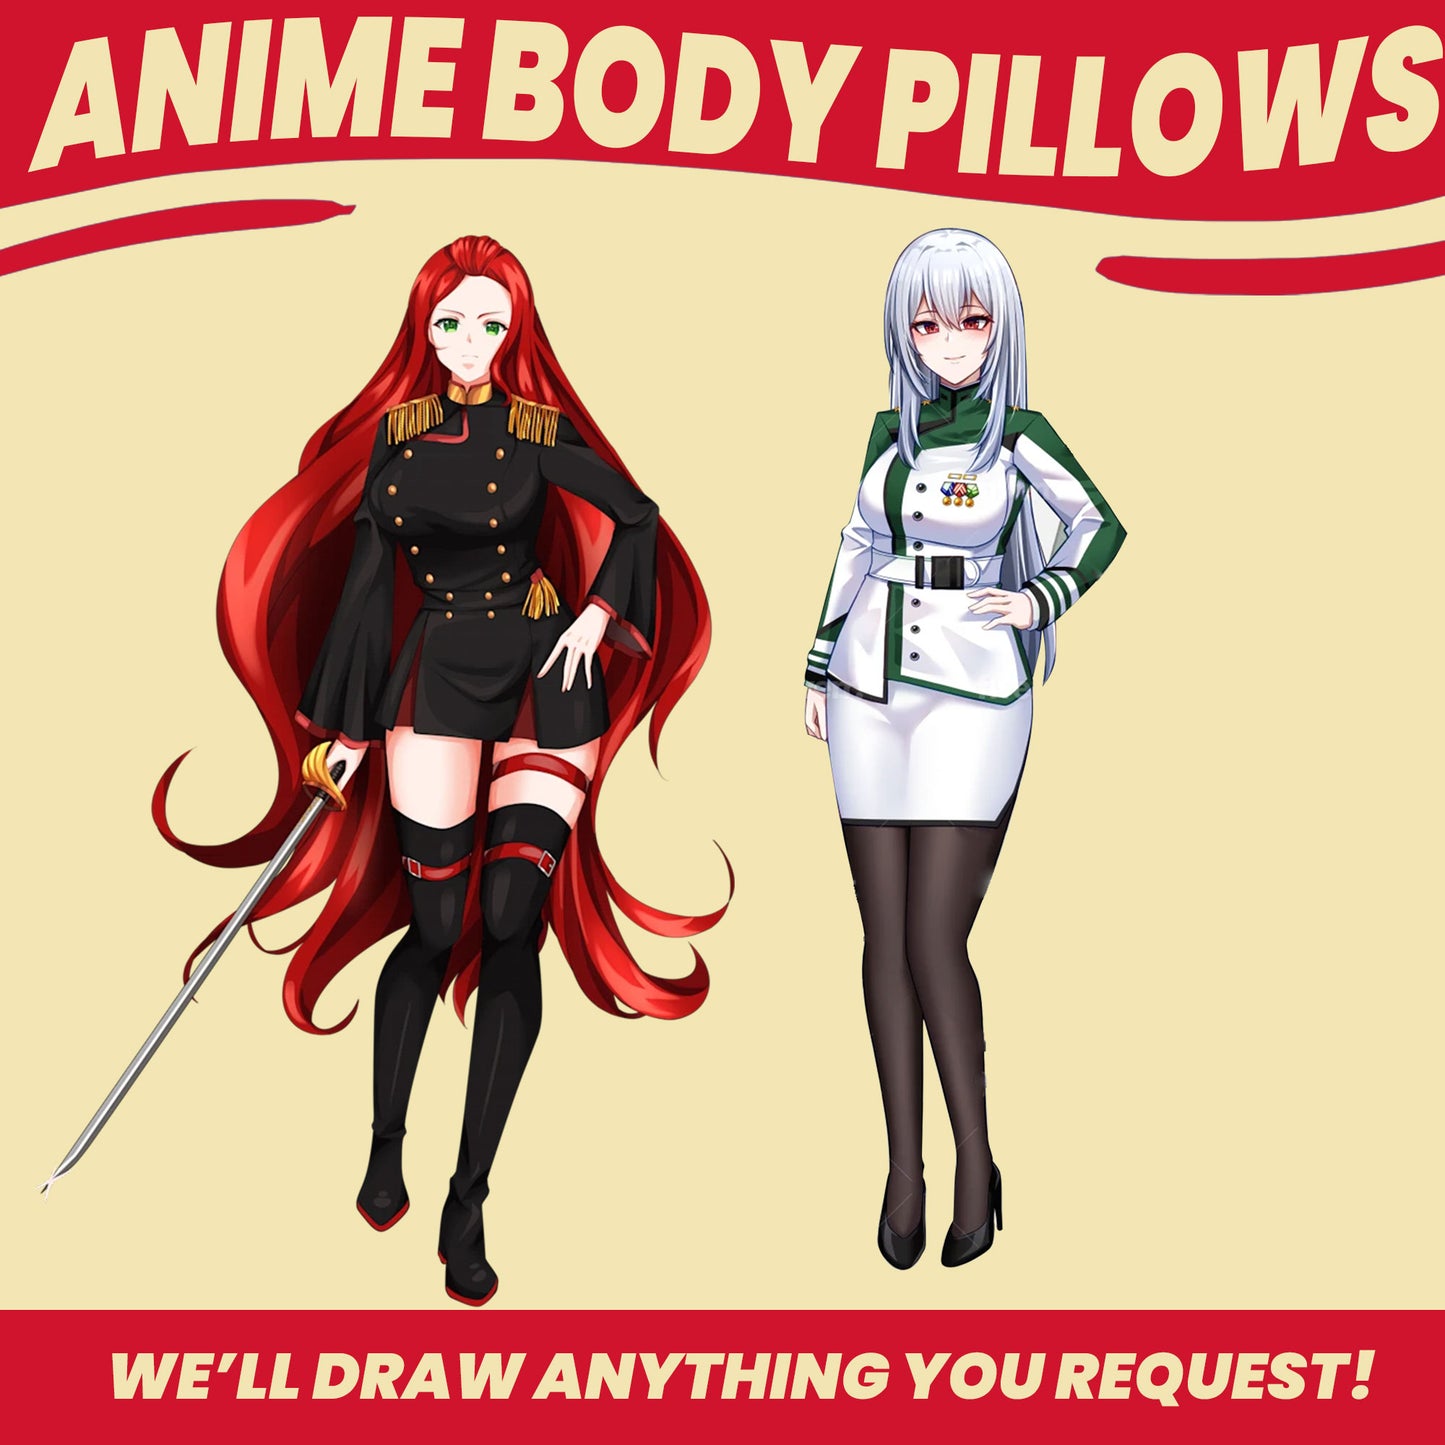 Personalized Anime Body Pillows